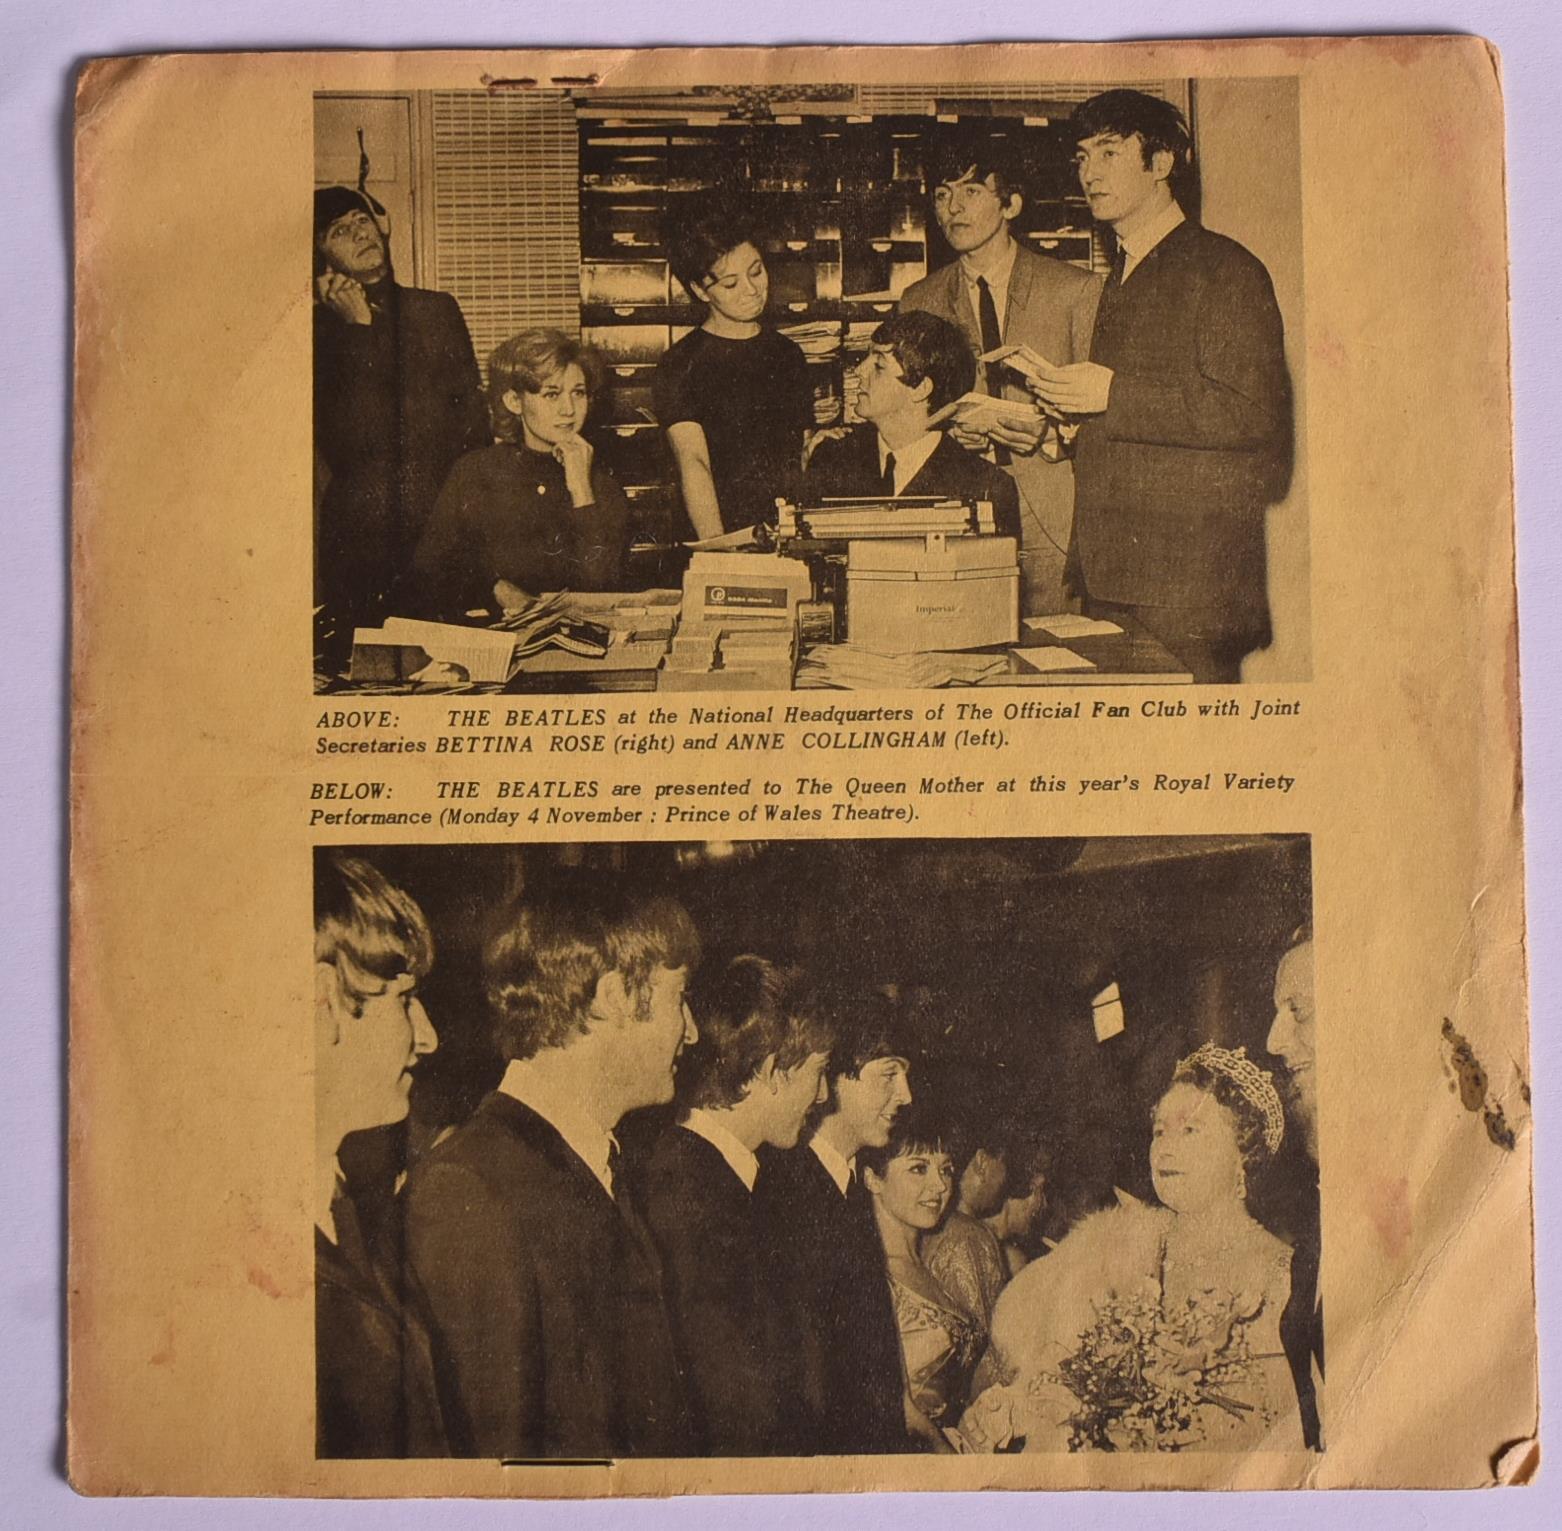 THE BEATLES - ORIGINAL 1963 OFFICIAL FAN CLUB FLEXI DISC RECORD - Image 4 of 4